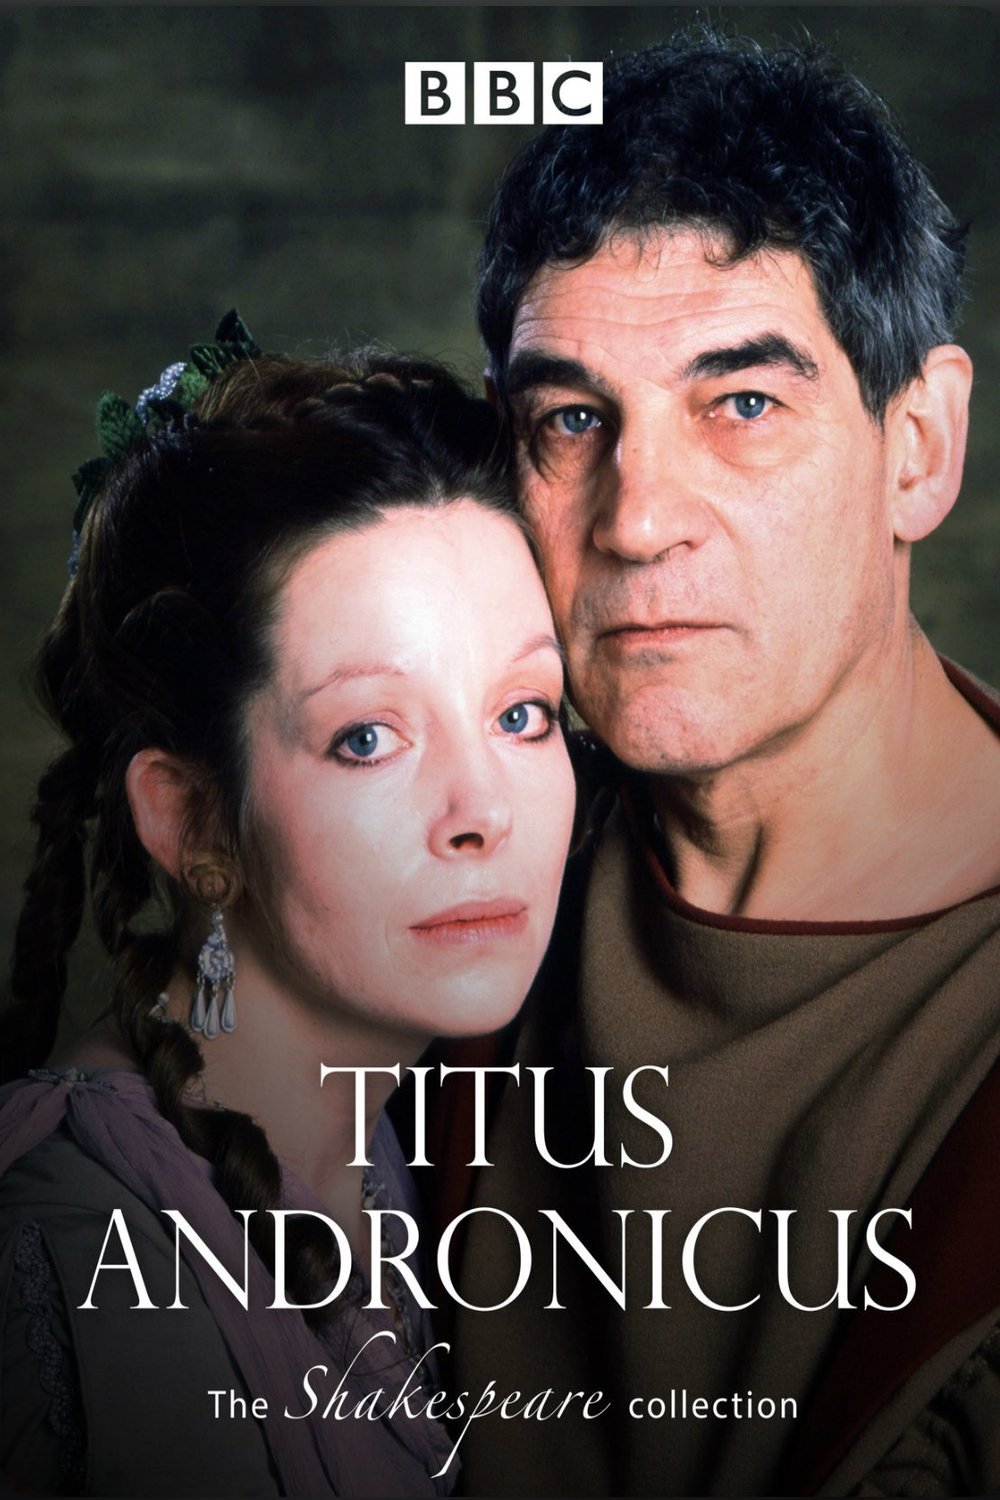 Poster of the movie Titus Andronicus